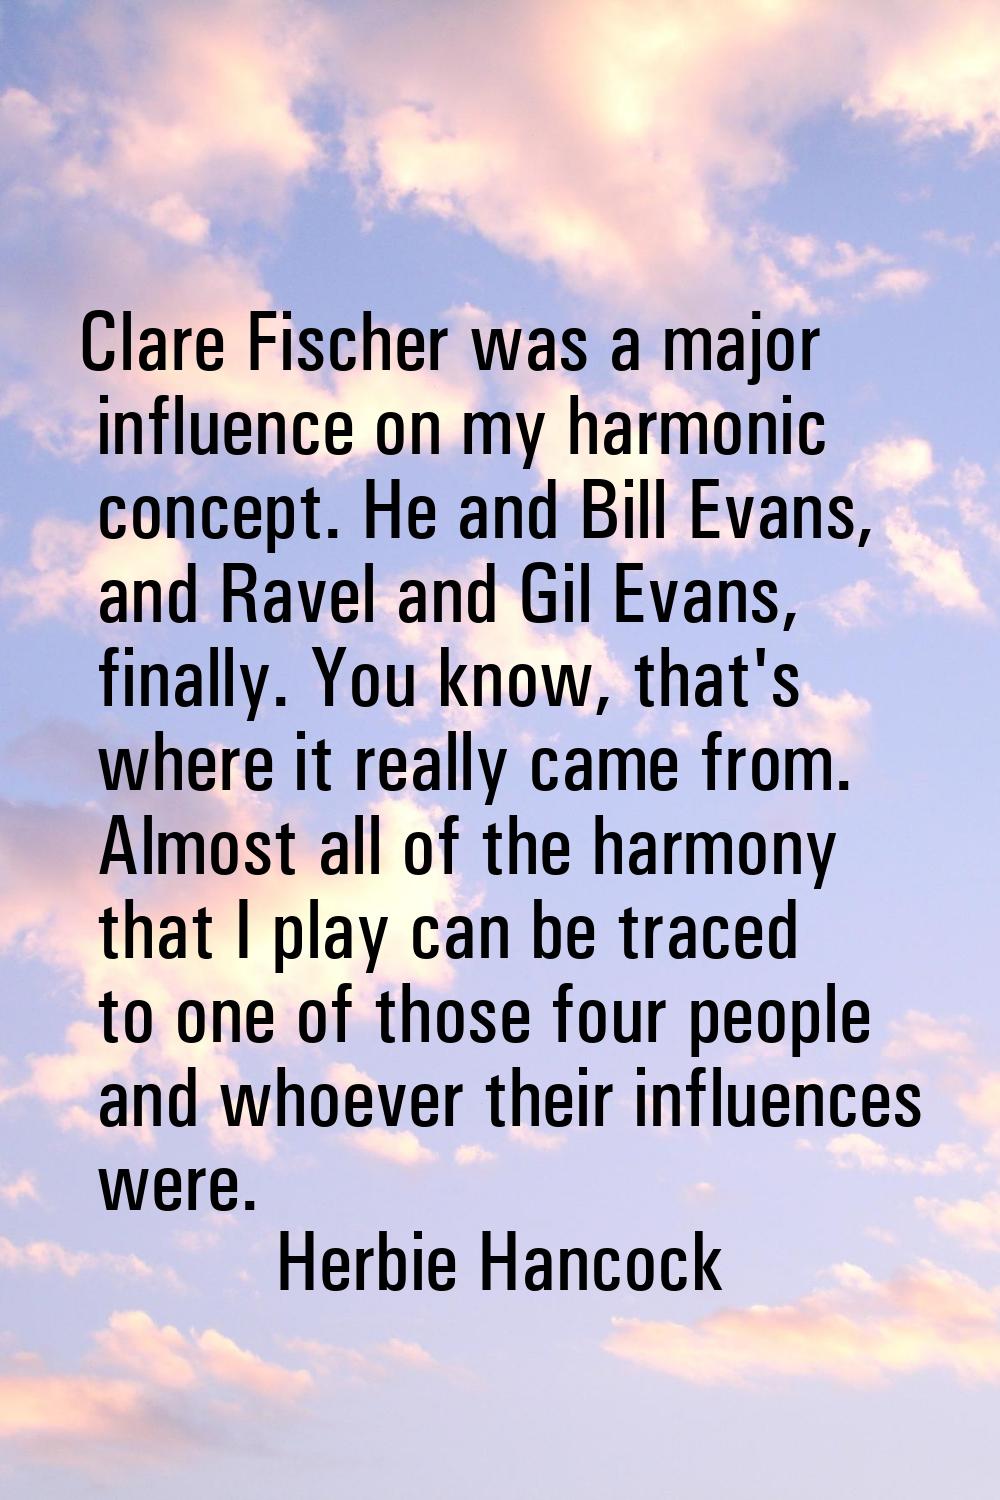 Clare Fischer was a major influence on my harmonic concept. He and Bill Evans, and Ravel and Gil Ev